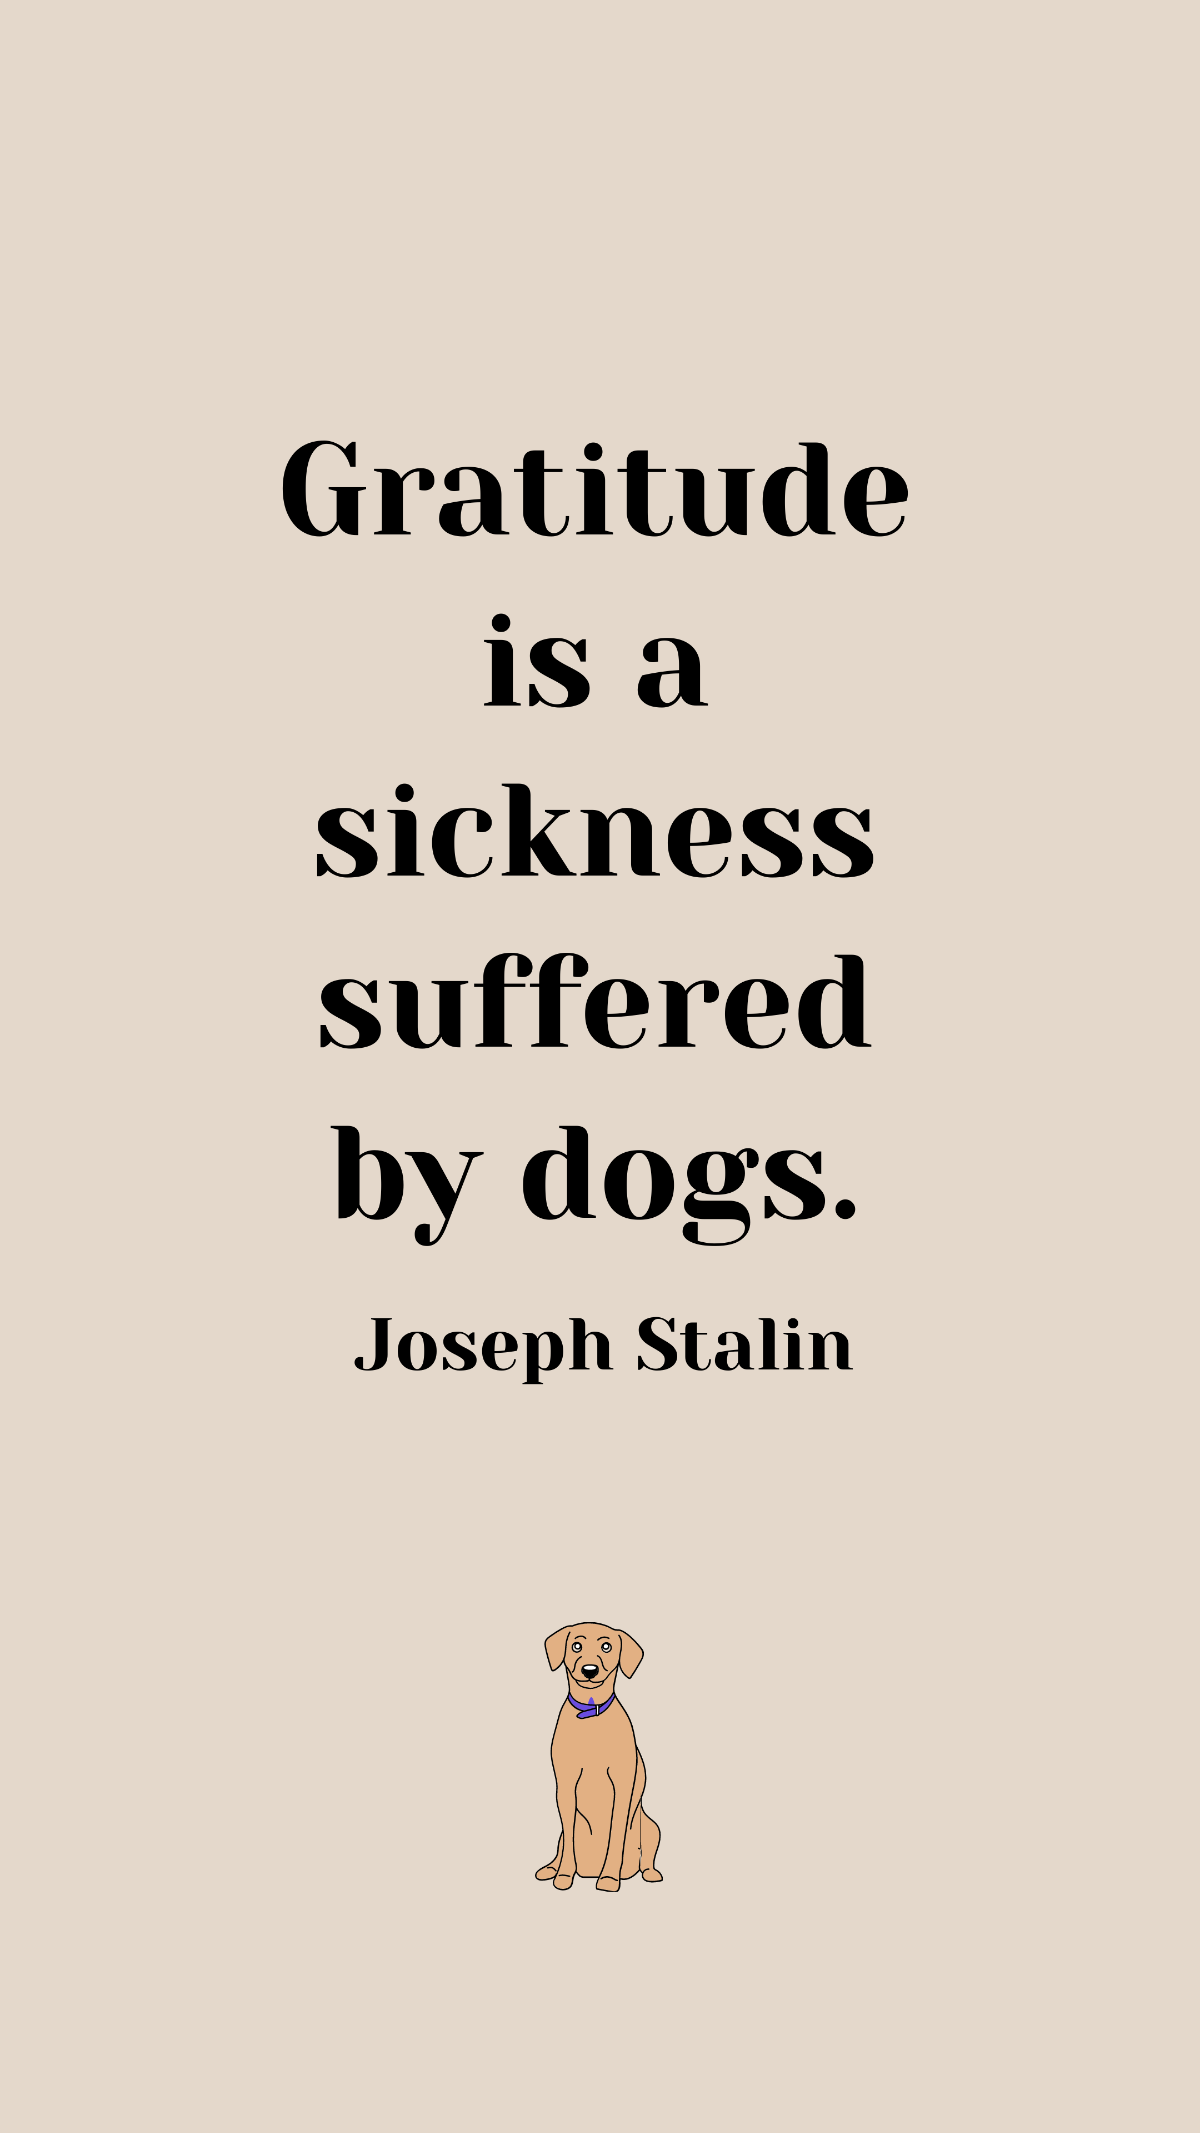 Joseph Stalin - Gratitude is a sickness suffered by dogs. Template